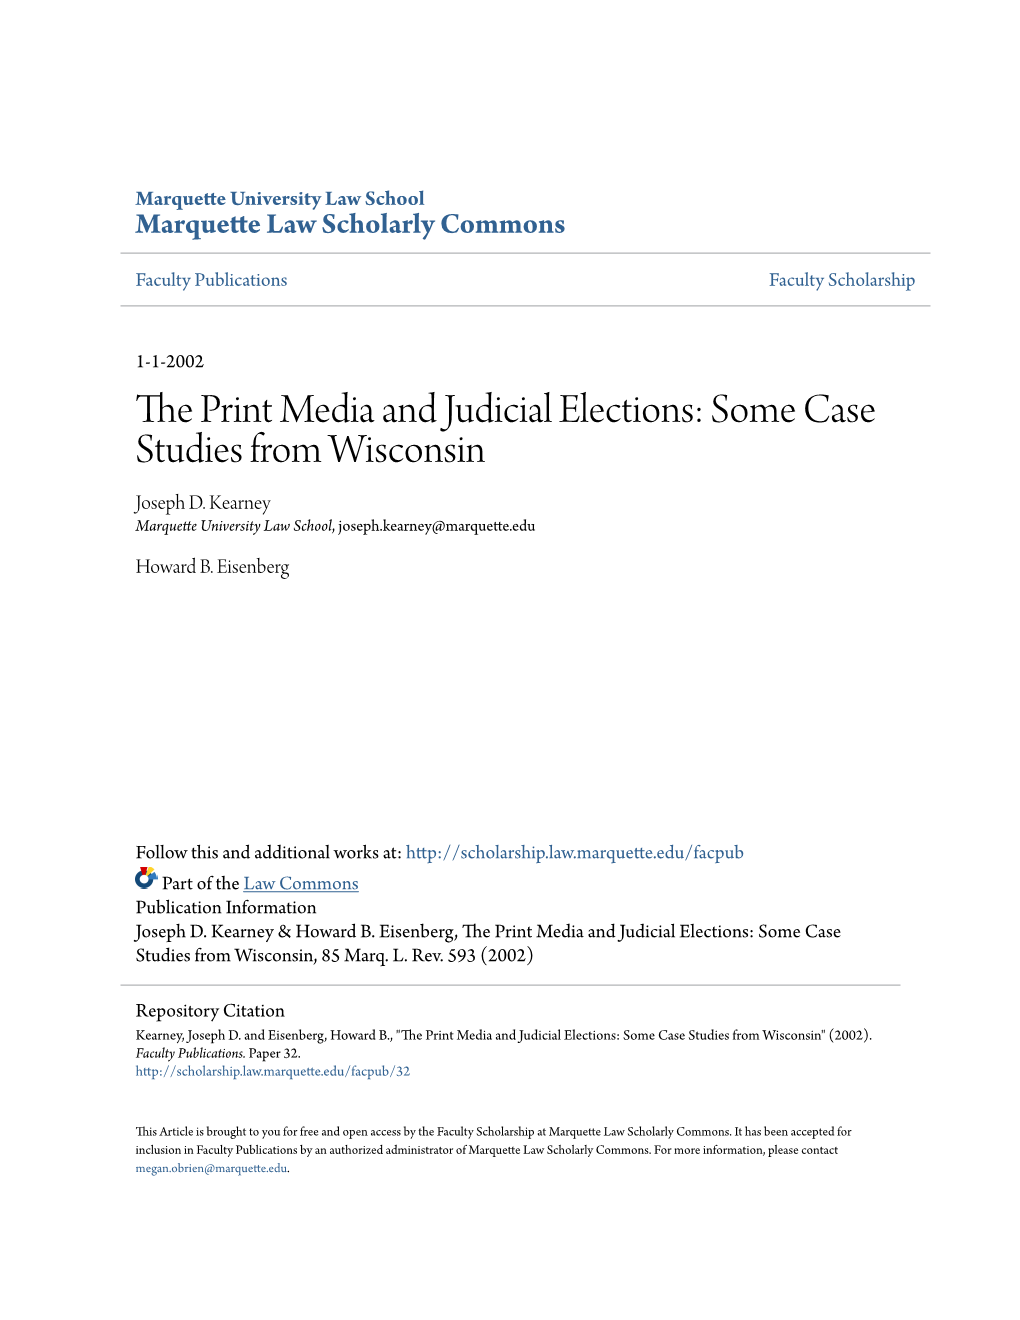 The Print Media and Judicial Elections: Some Case Studies from Wisconsin